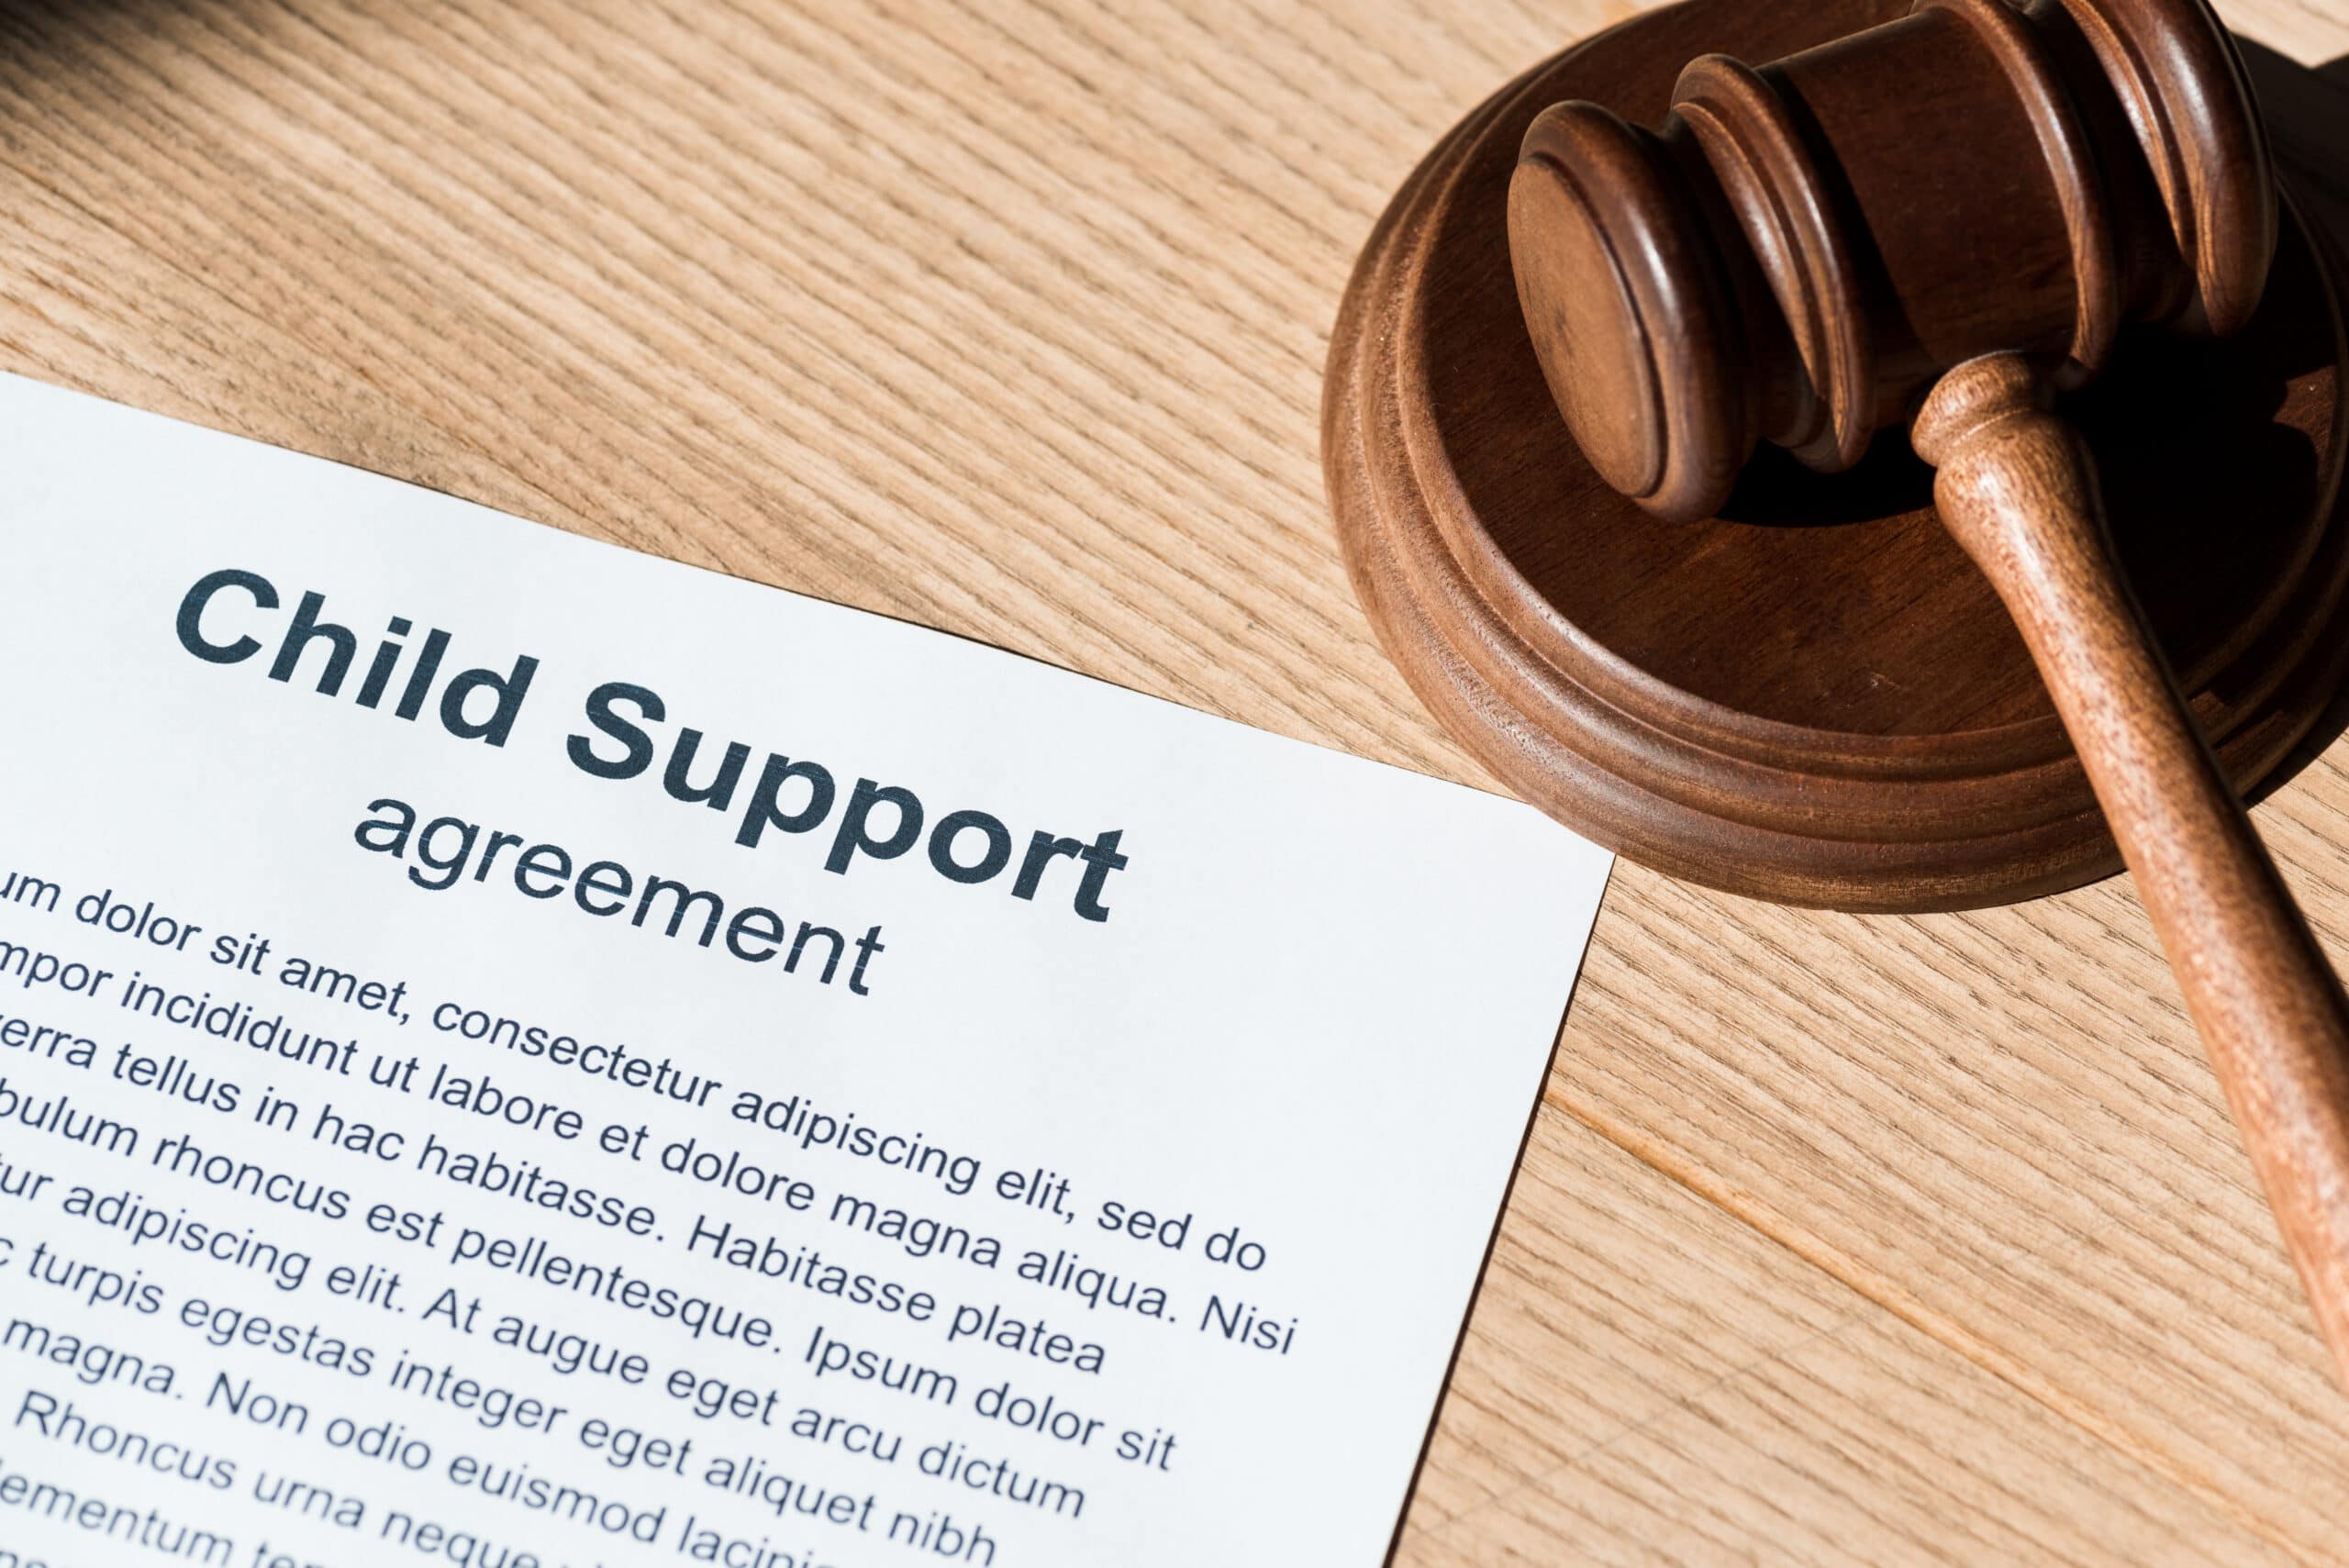 Child Support Law